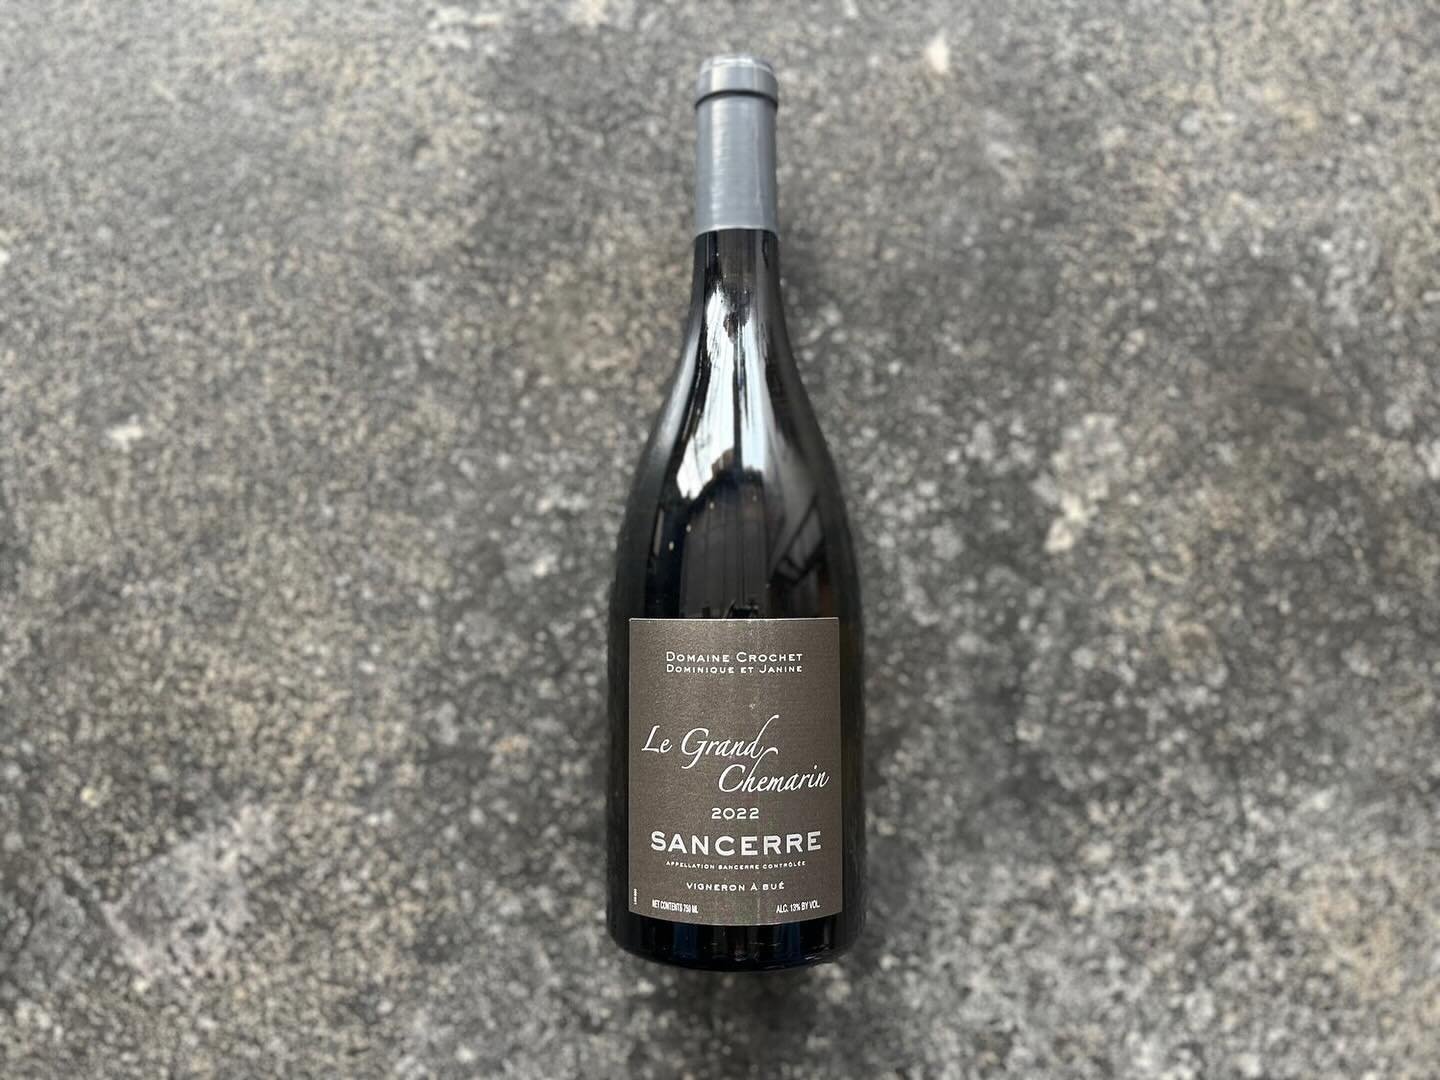 WINE WEDNESDAY

This wine is from one of the most important vineyards in Sancerre where the families legacy is just as important as the vineyards. Dominique Crochet&rsquo;s Les Ch&ecirc;ne Marechand Sancerre is a gorgeously expressive wine. This vine